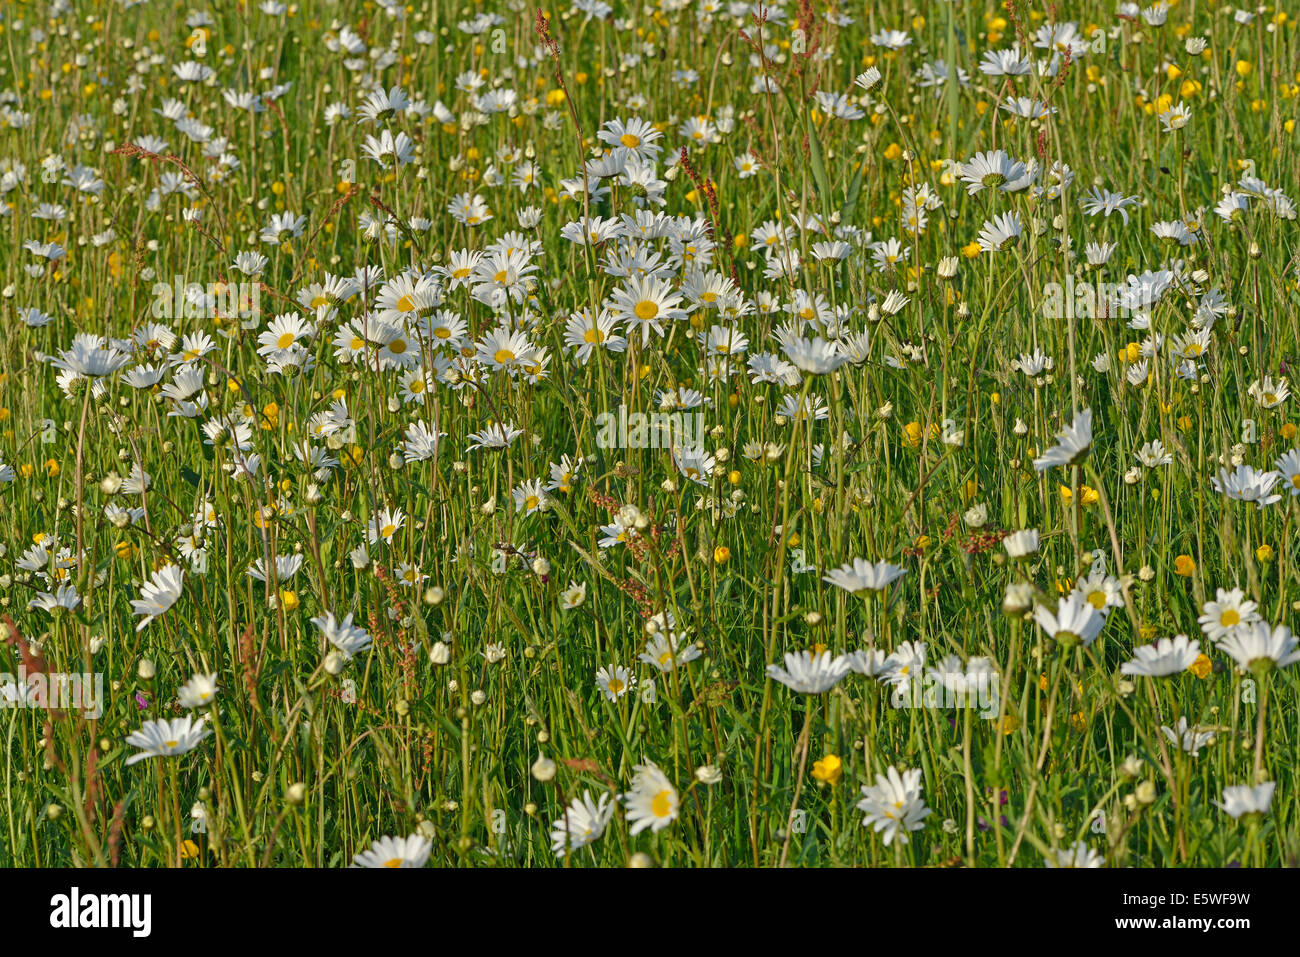 Flower meadow with Oxeye Daisies or Ox-eye Daisies (Leucanthemum vulgare) and Tall Buttercups (Ranunculus acris), Texel Stock Photo